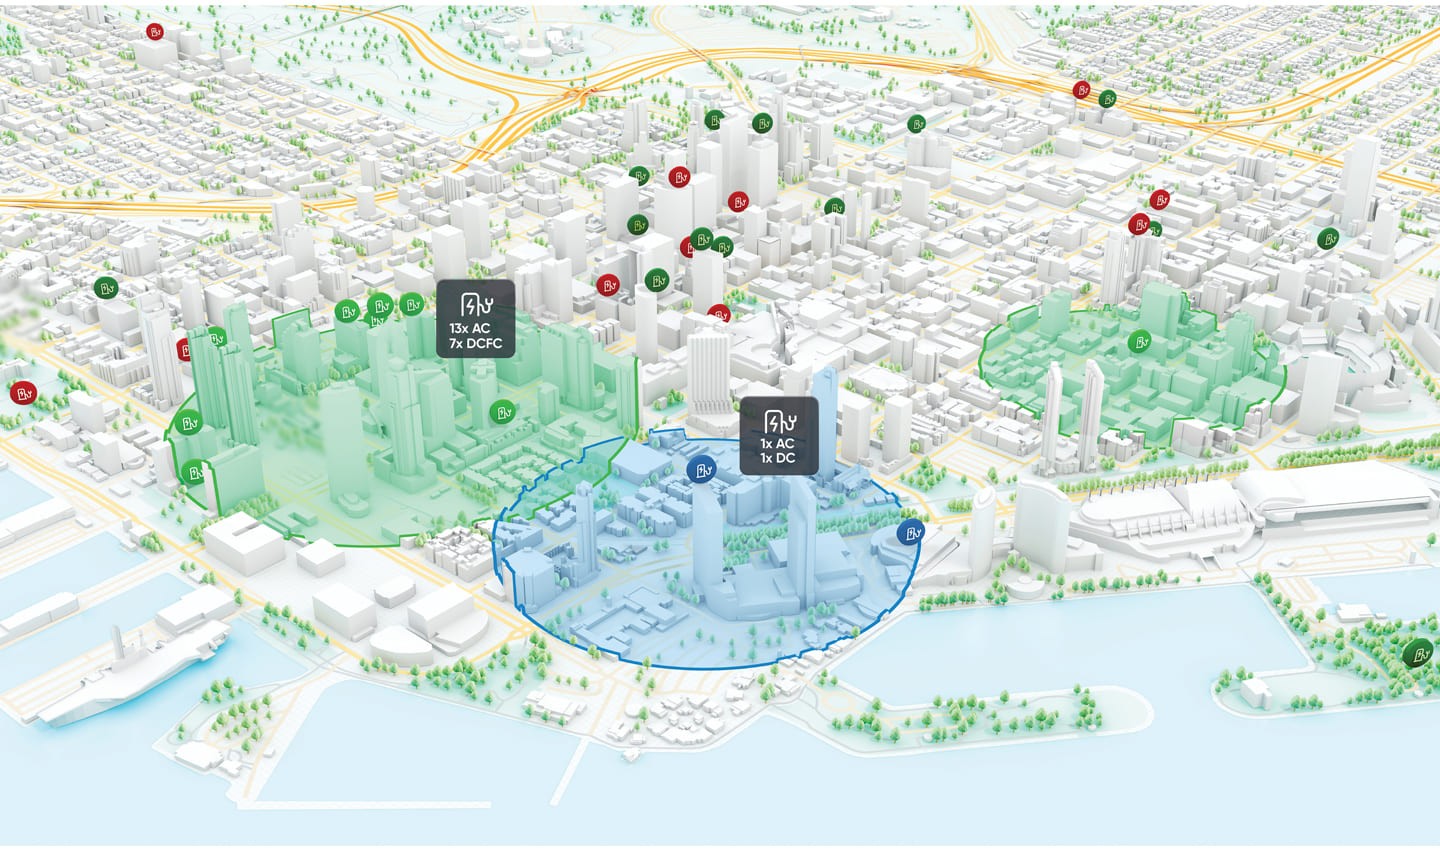 A map showing downtown in a city and the collection of EV chargers on show